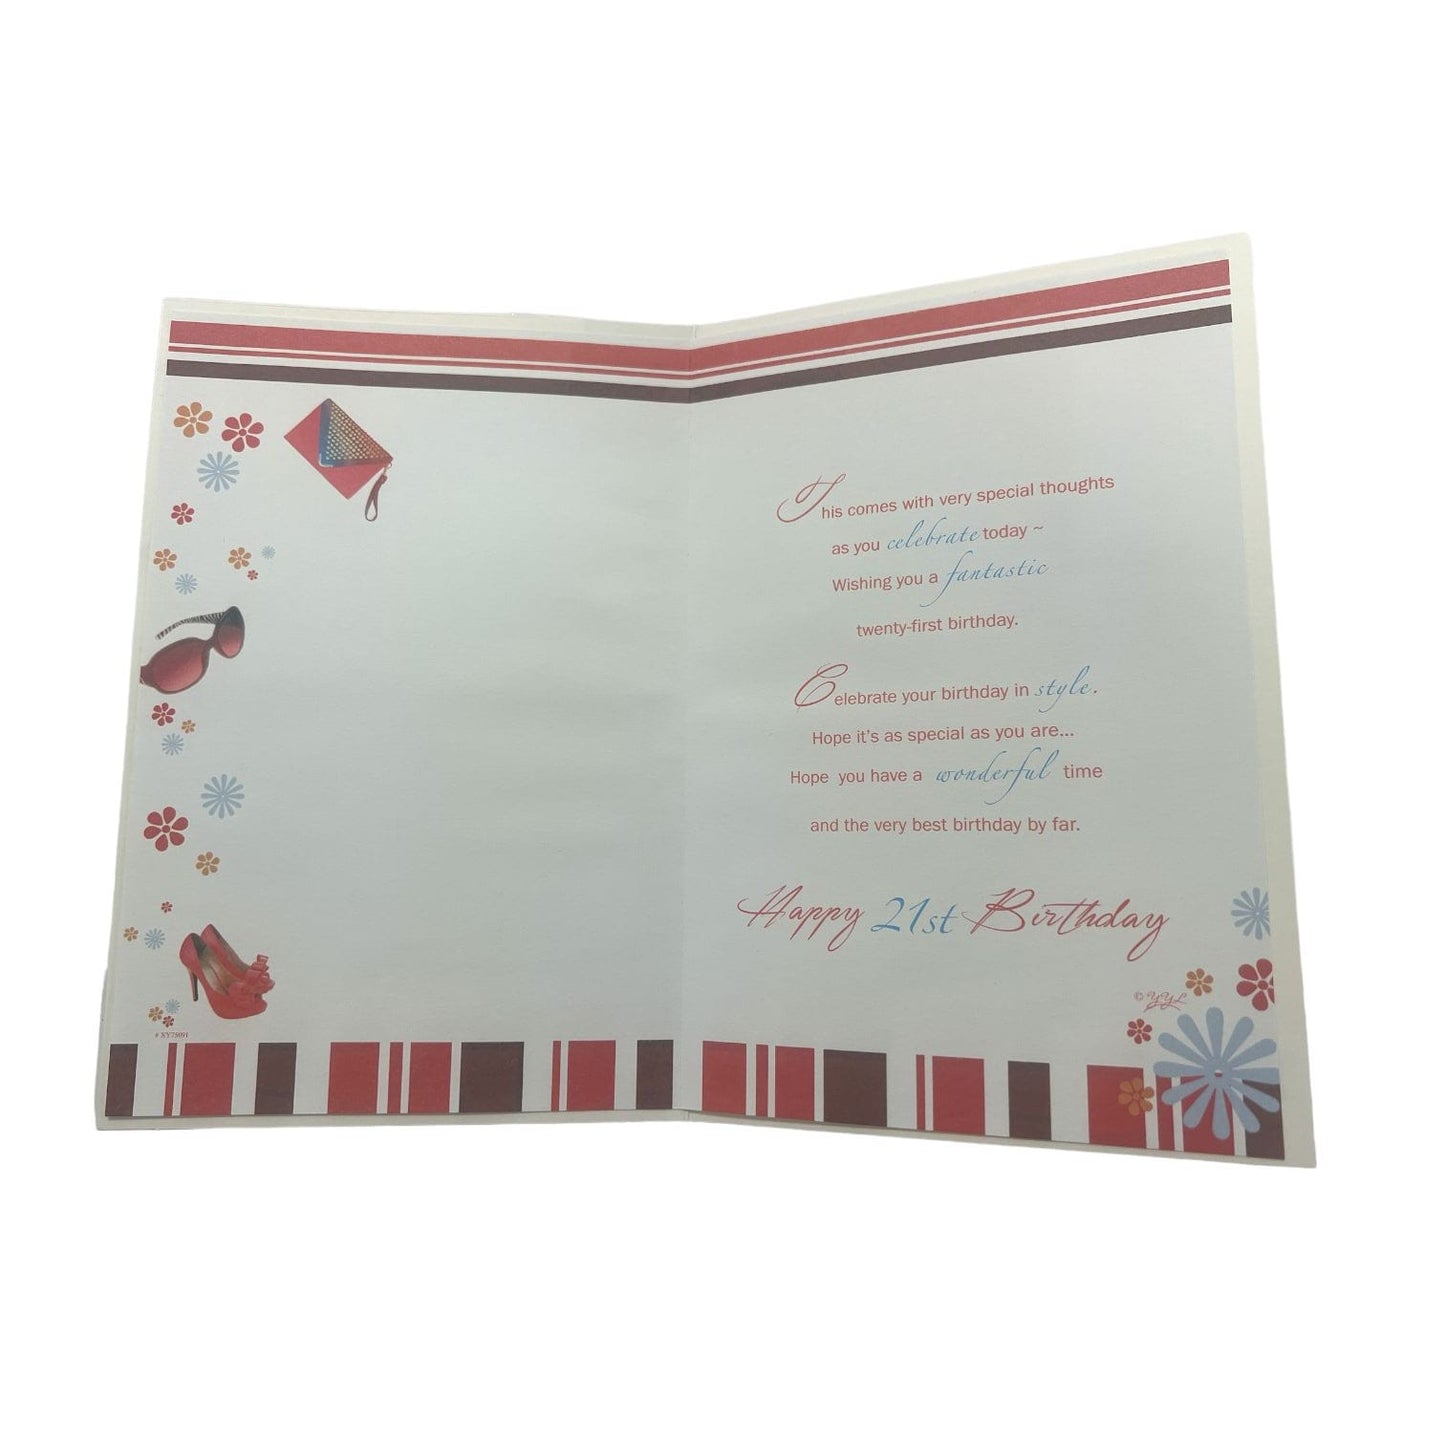 Your 21st Birthday Greetings Card For Her